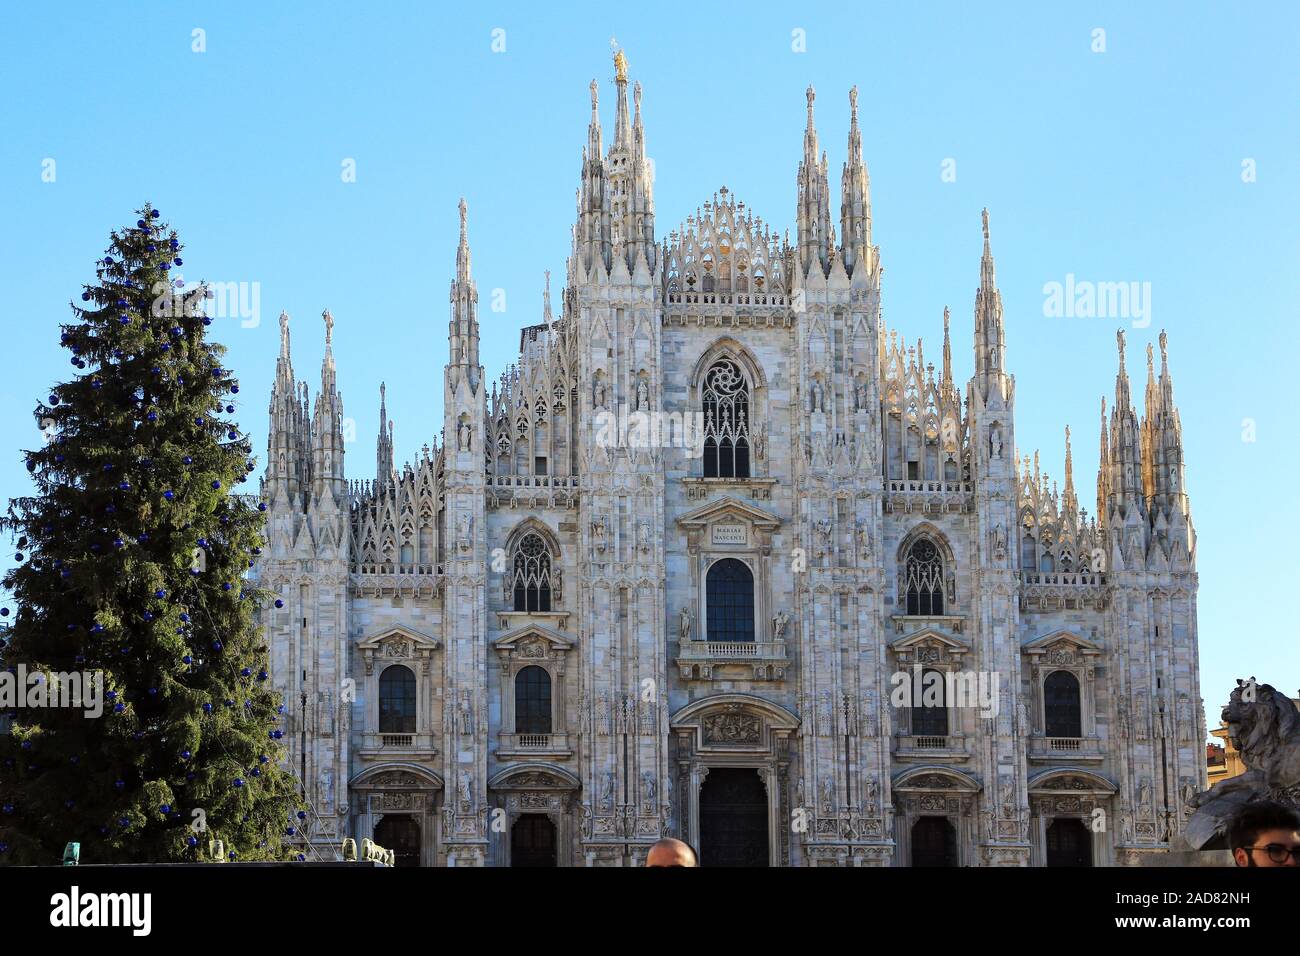 Milan, facade of Milan Cathedral with Christmas tree Stock Photo